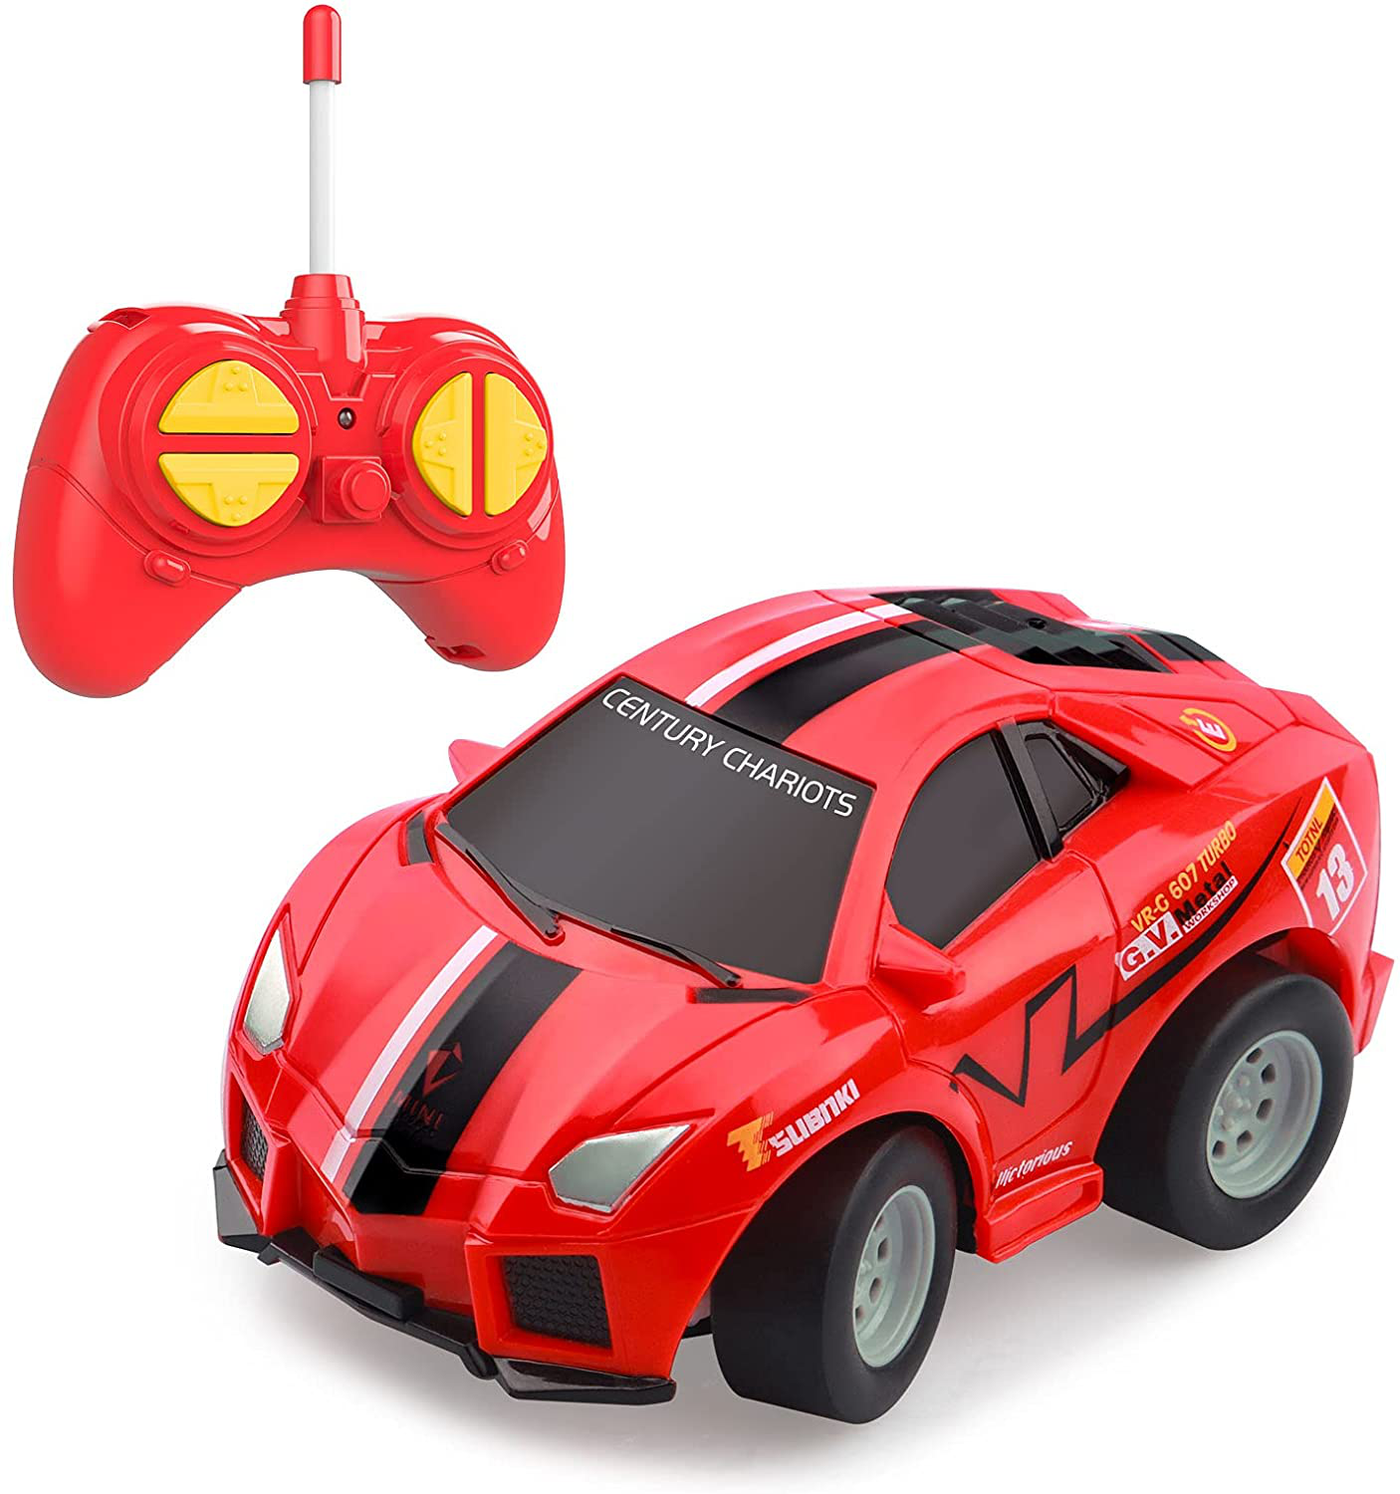 Toys for 2-5 Year Old Boys,Mini Remote Control Car,Toddler Toys Age 2-4,RC Car for Kids,Car Toys for Boys 3-5 Year Old,Gifts for 2 3 4 5 Year Old Boys Girls Birthday,Red